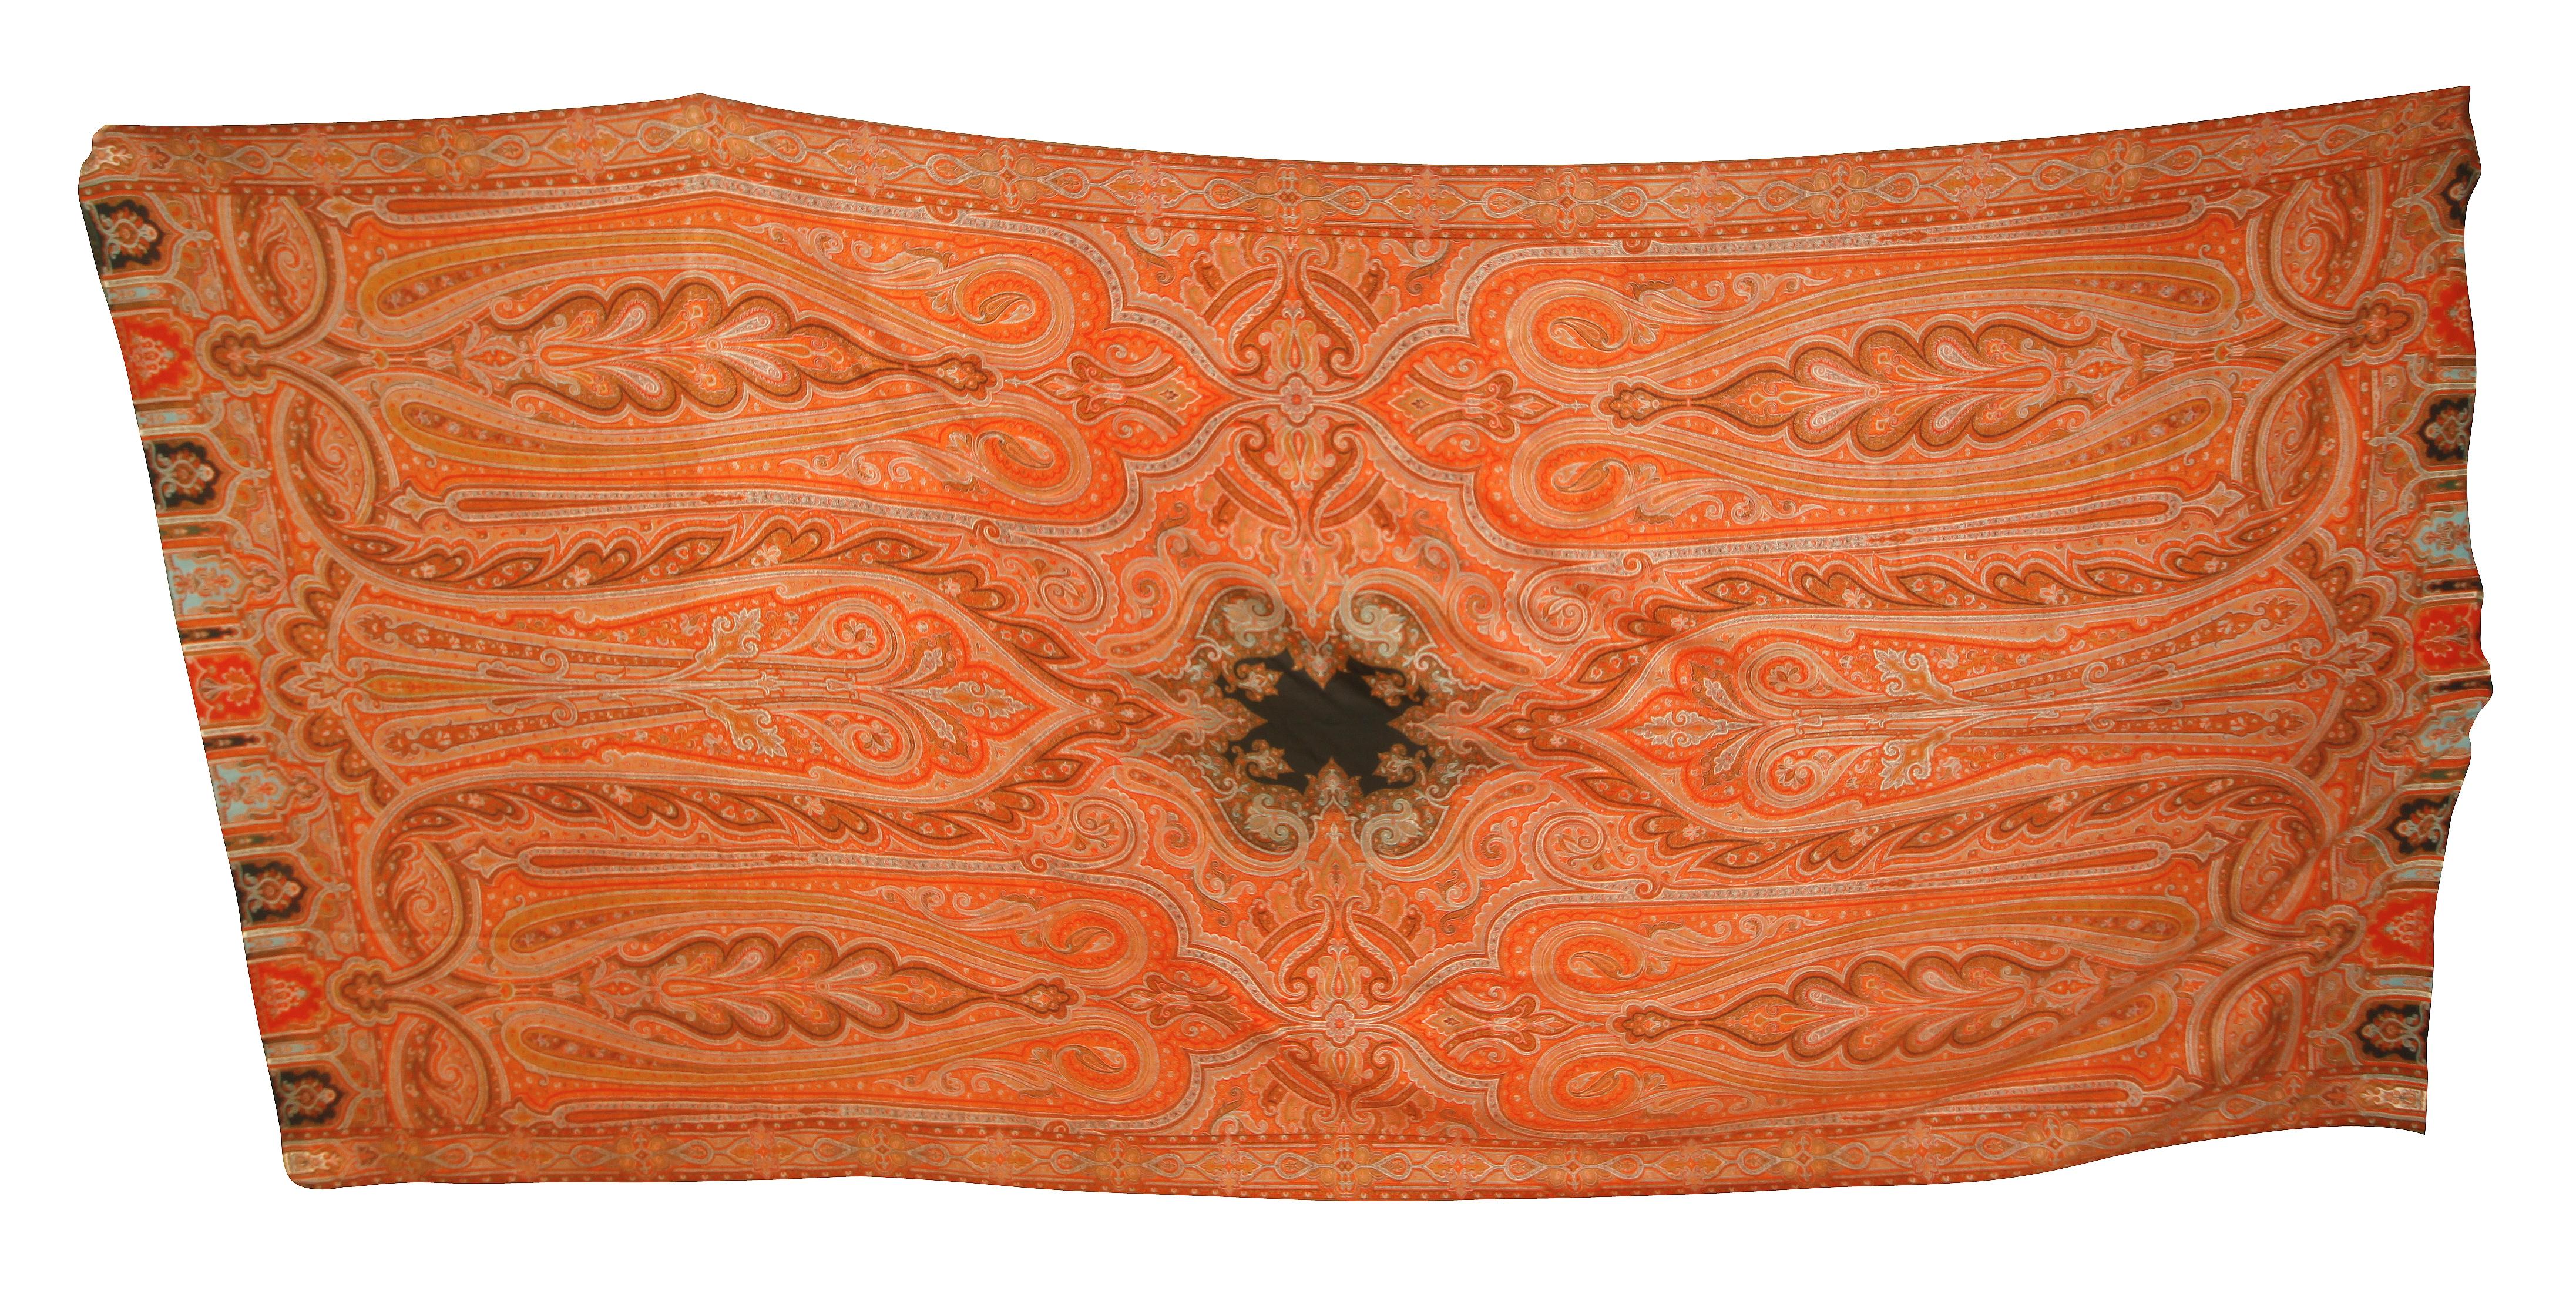 Handwoven Kashmir Paisley Blanket In Good Condition For Sale In Locust Valley, NY